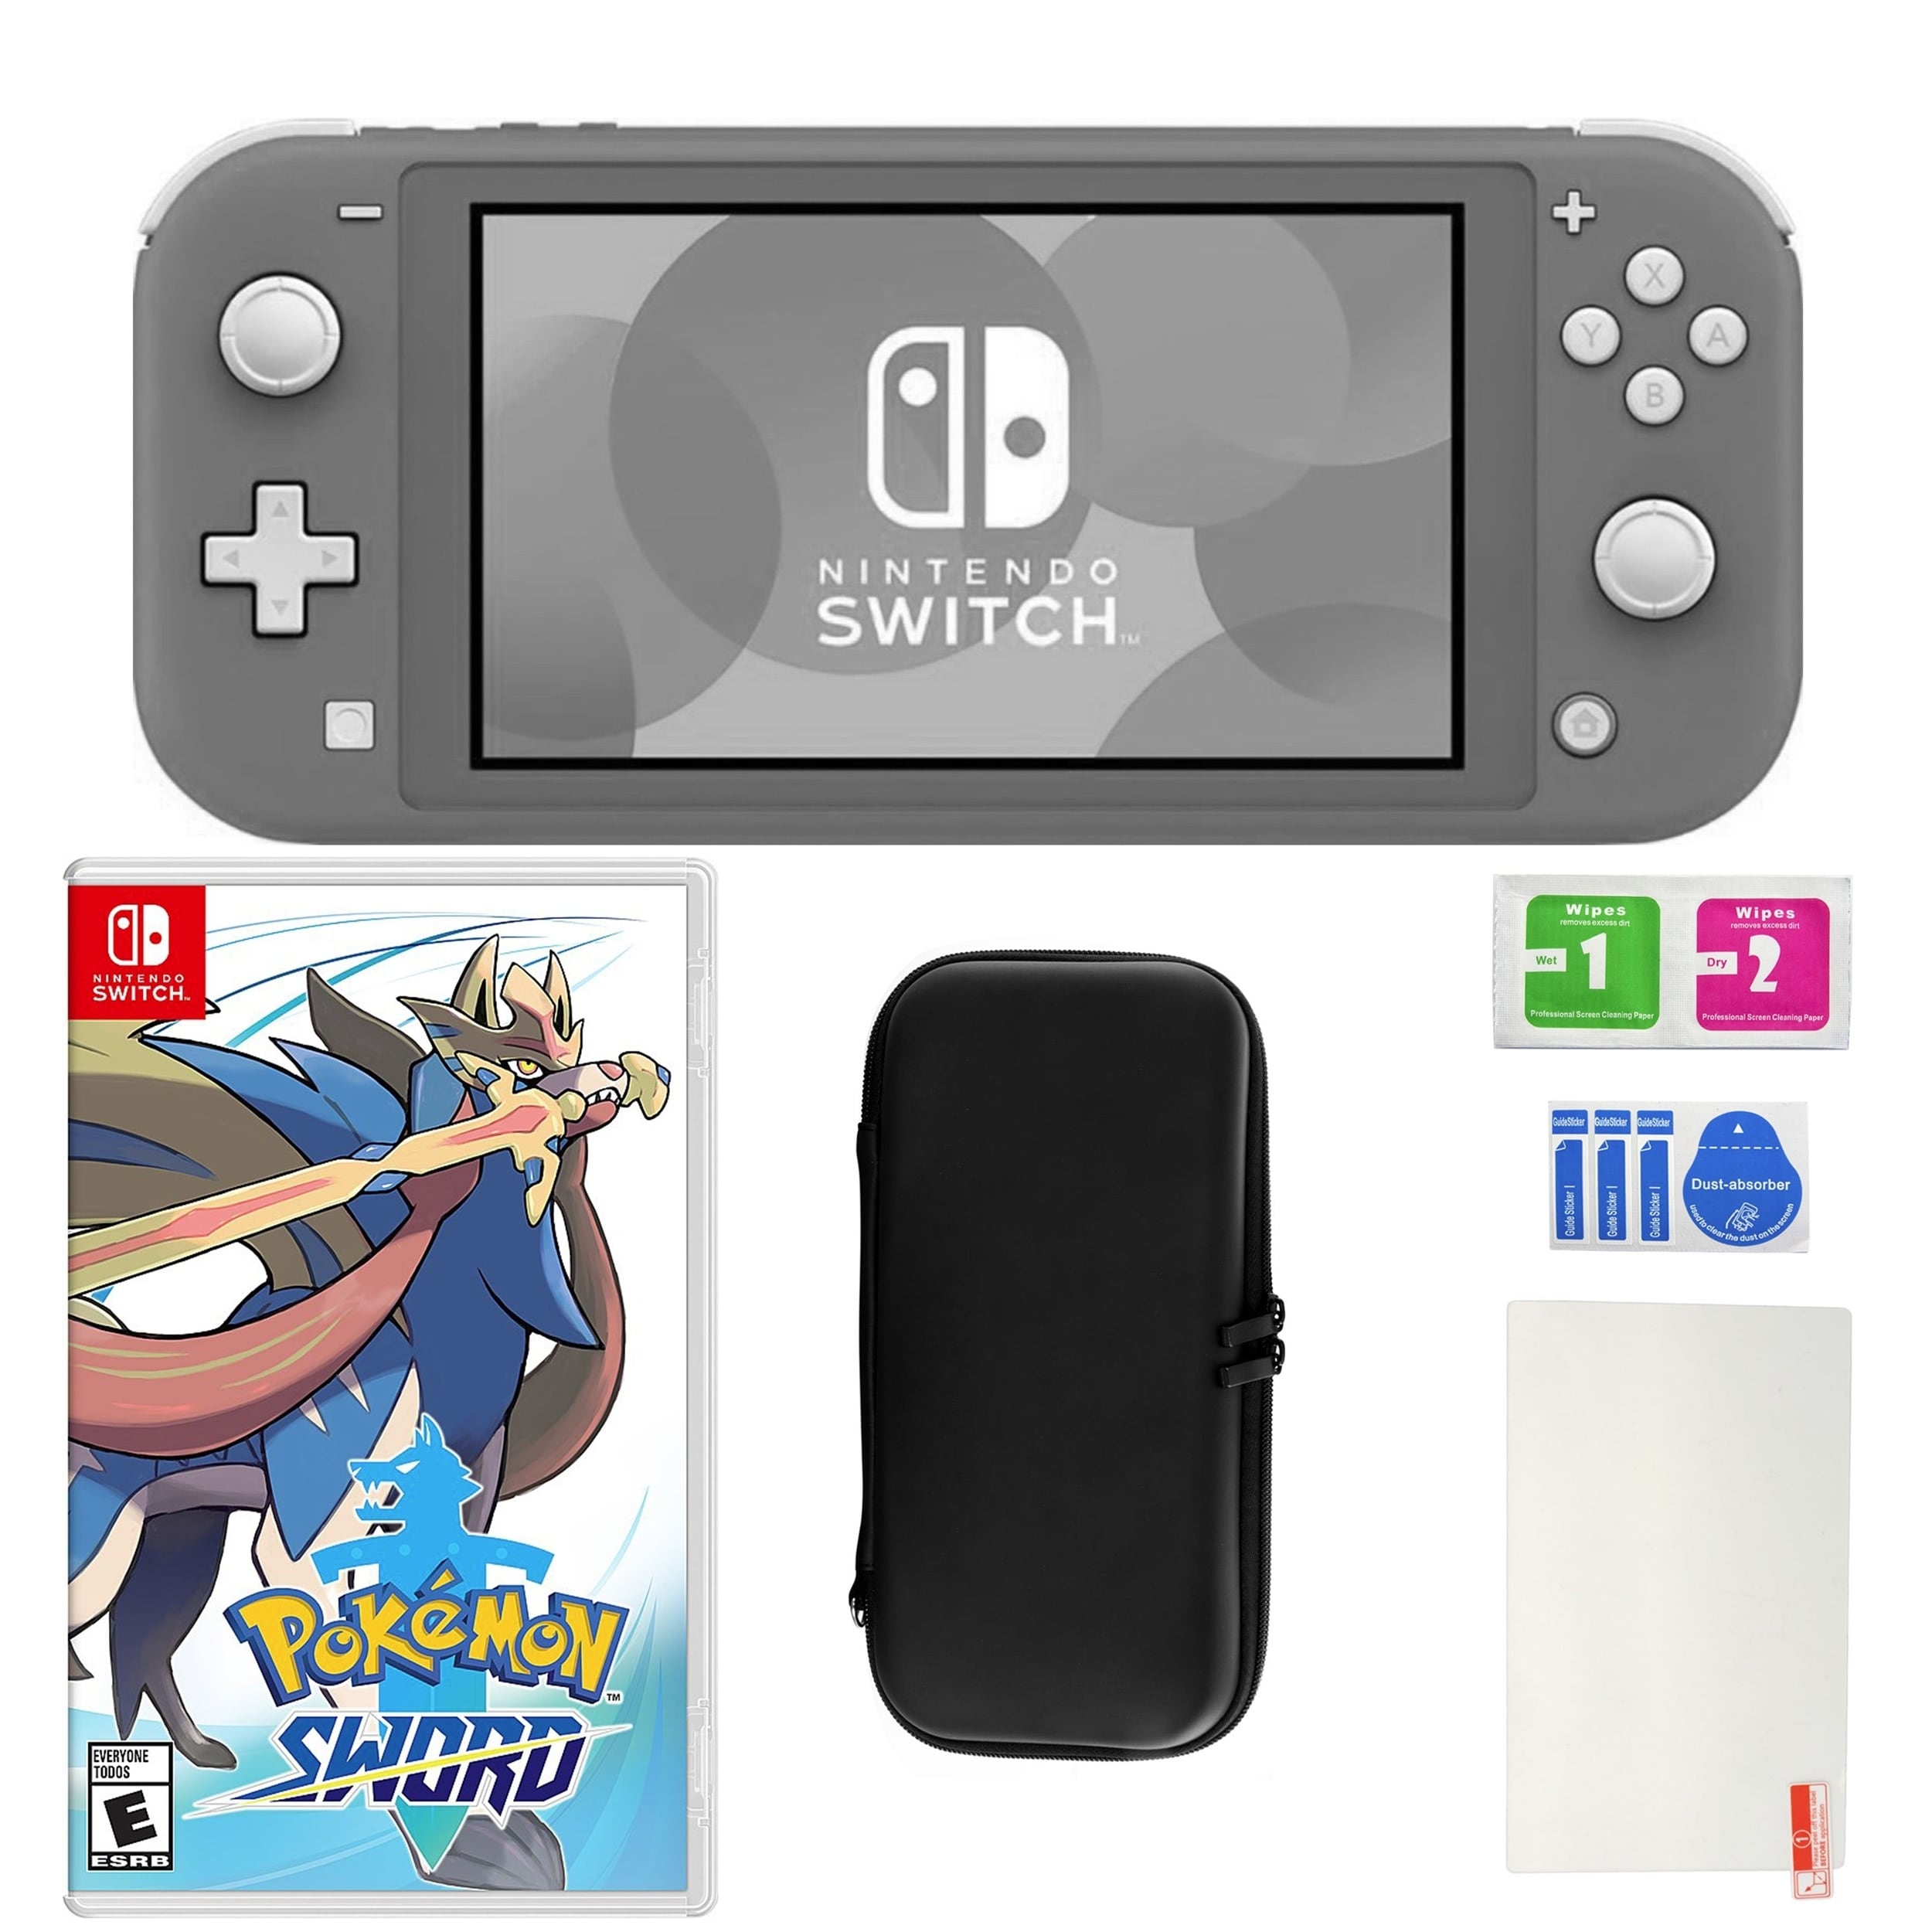 Nintendo Switch Lite In Gray With Pokemon Sword And Accessories Overstock